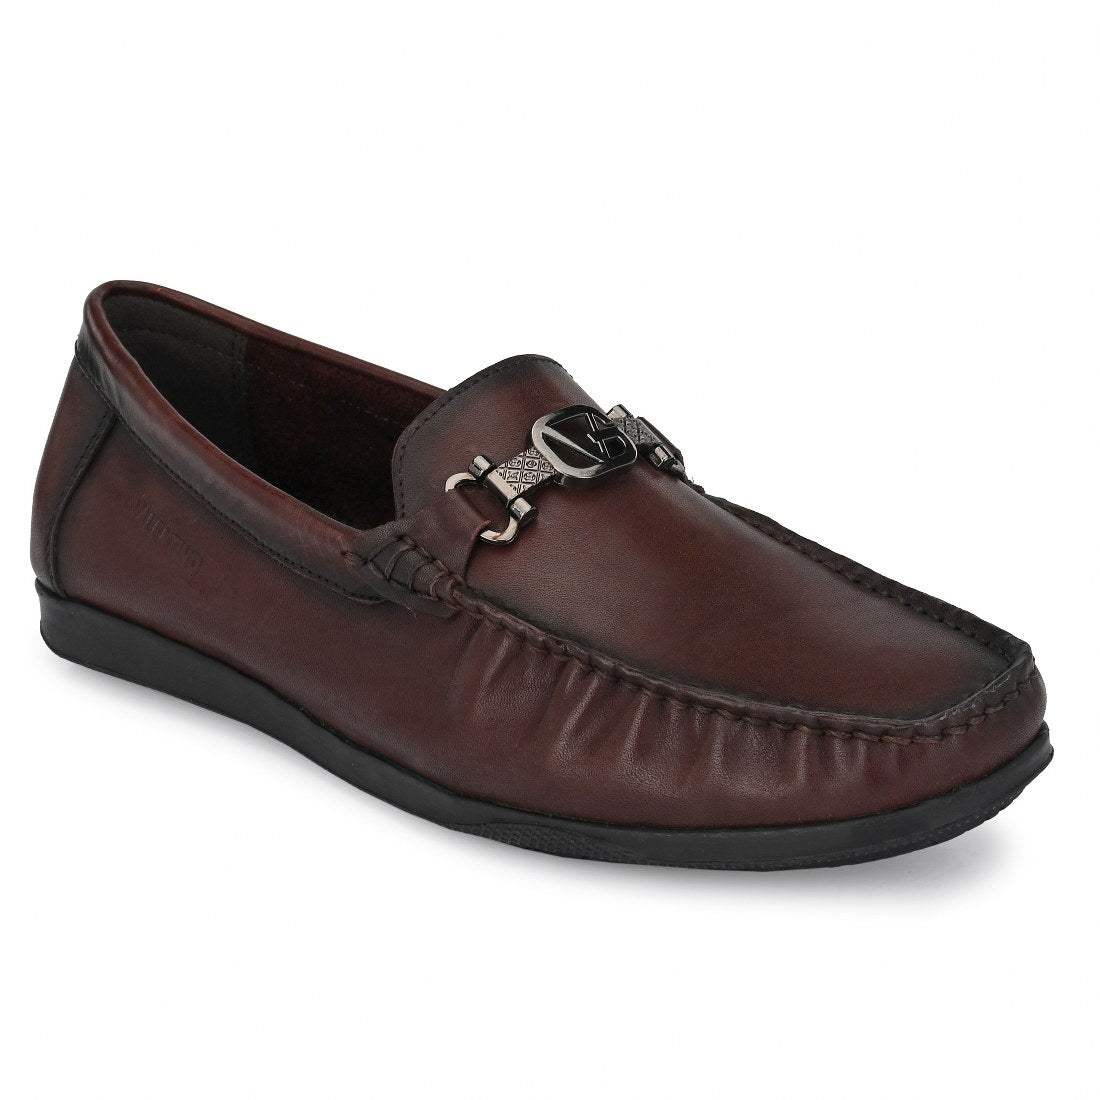 V-CLASS-11 MEN LEATHER BROWN CASUAL SLIP ON LOAFER